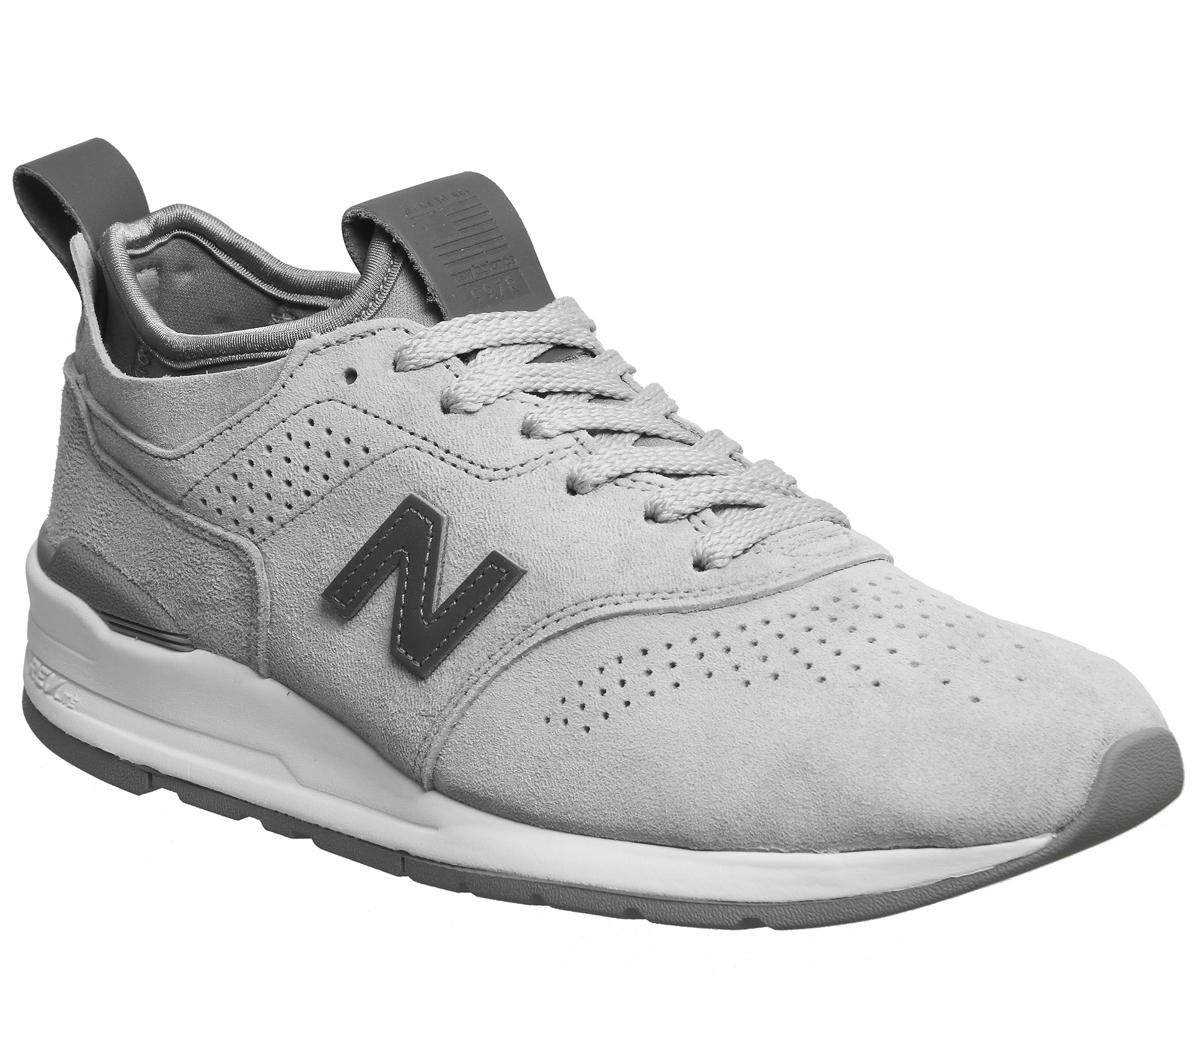 New Balance M997D Trainers Grey Black Miusa - His trainers